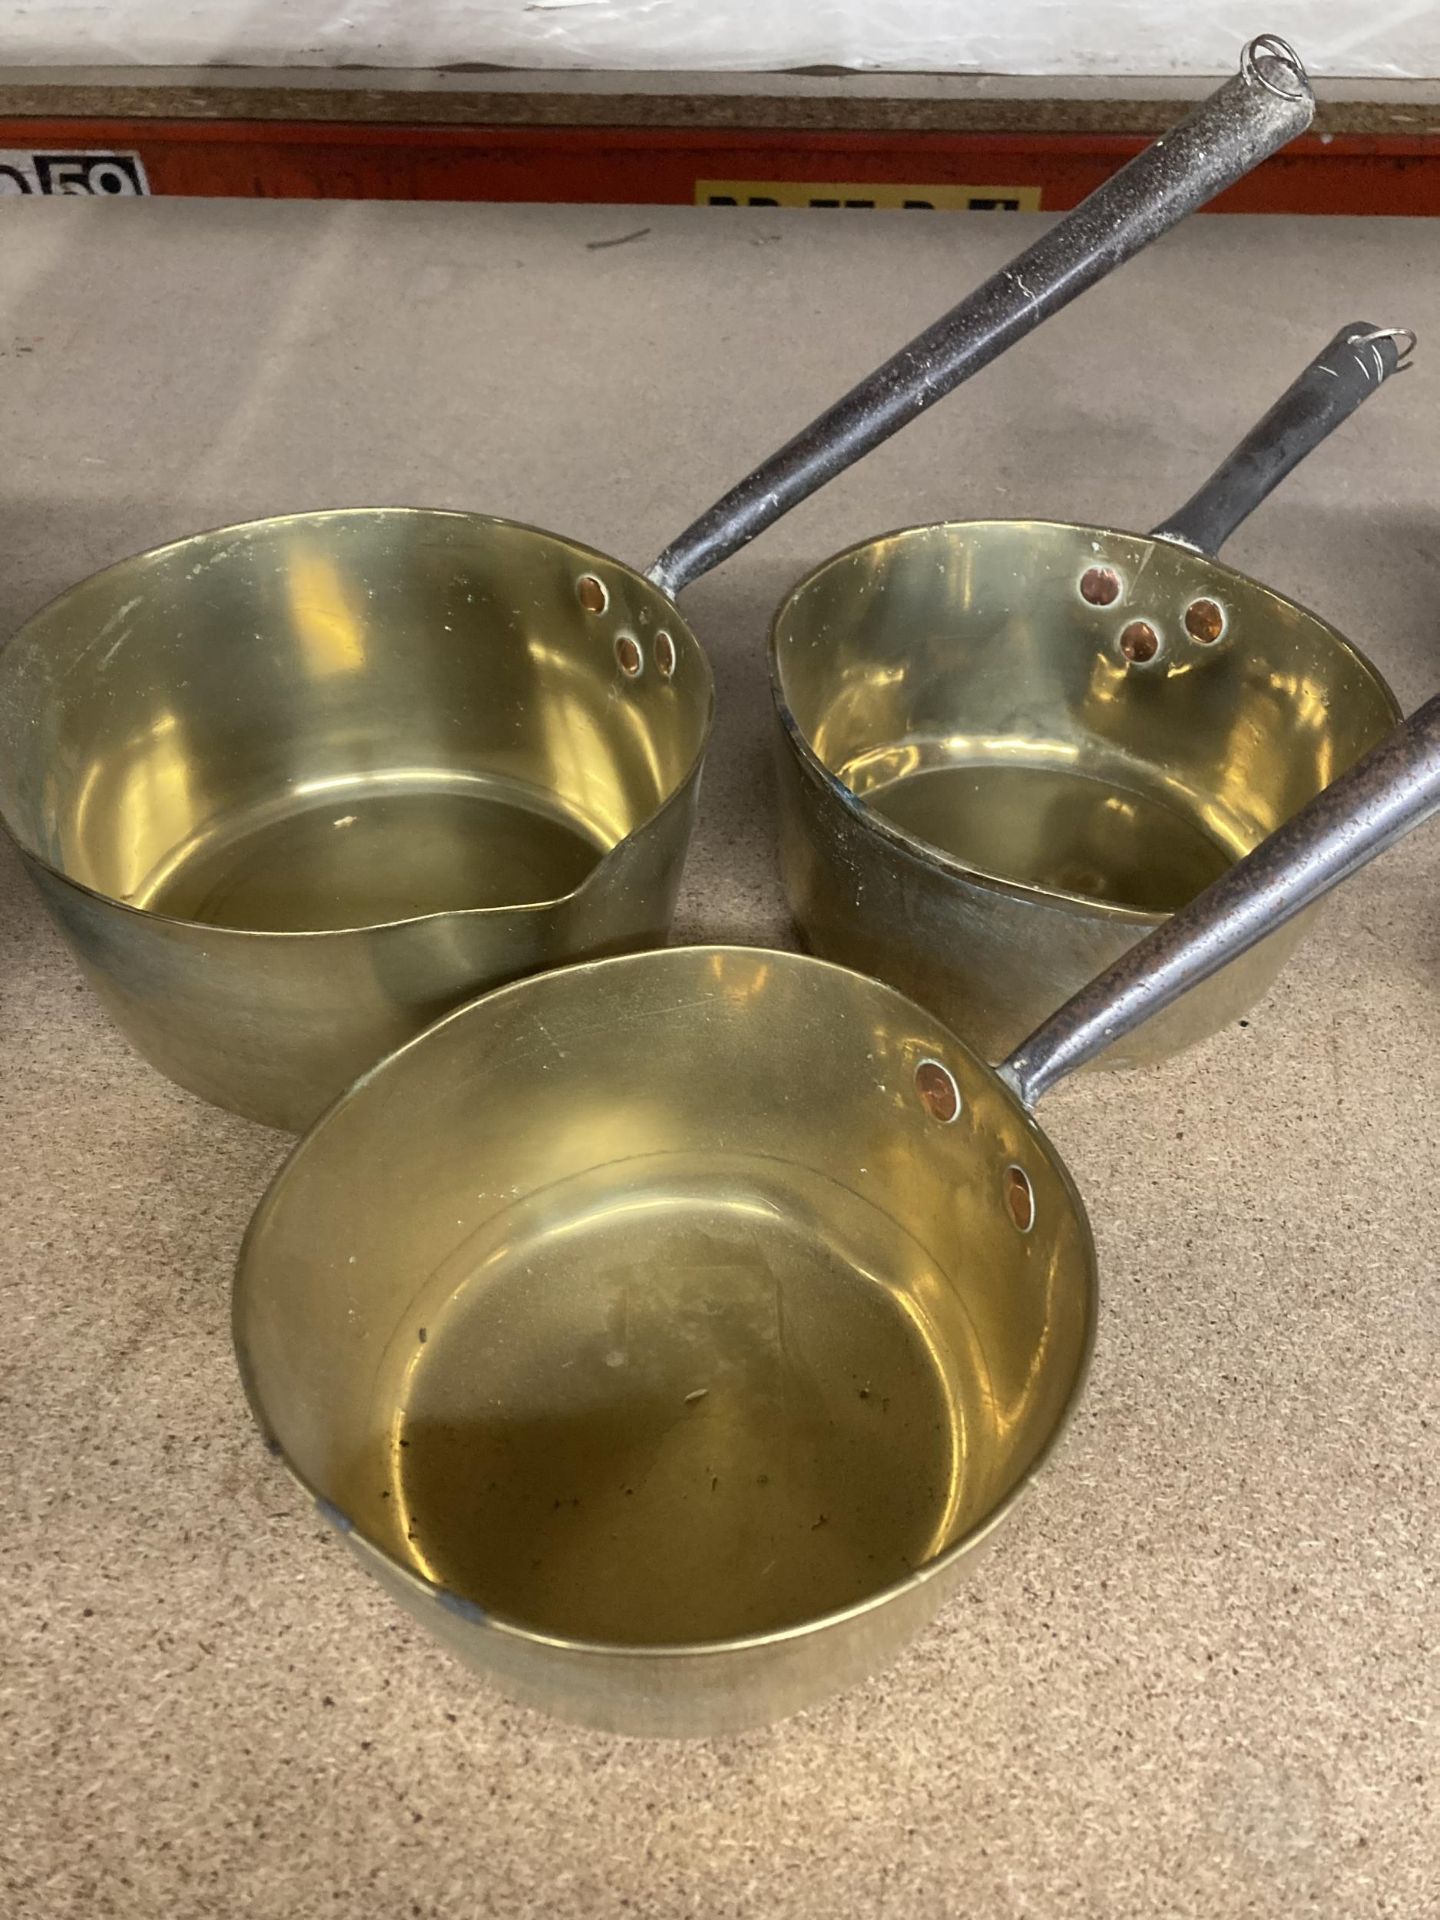 A GROUP OF THREE VINTAGE BRASS COOKING POTS WITH CAST HANDLES - Image 2 of 2